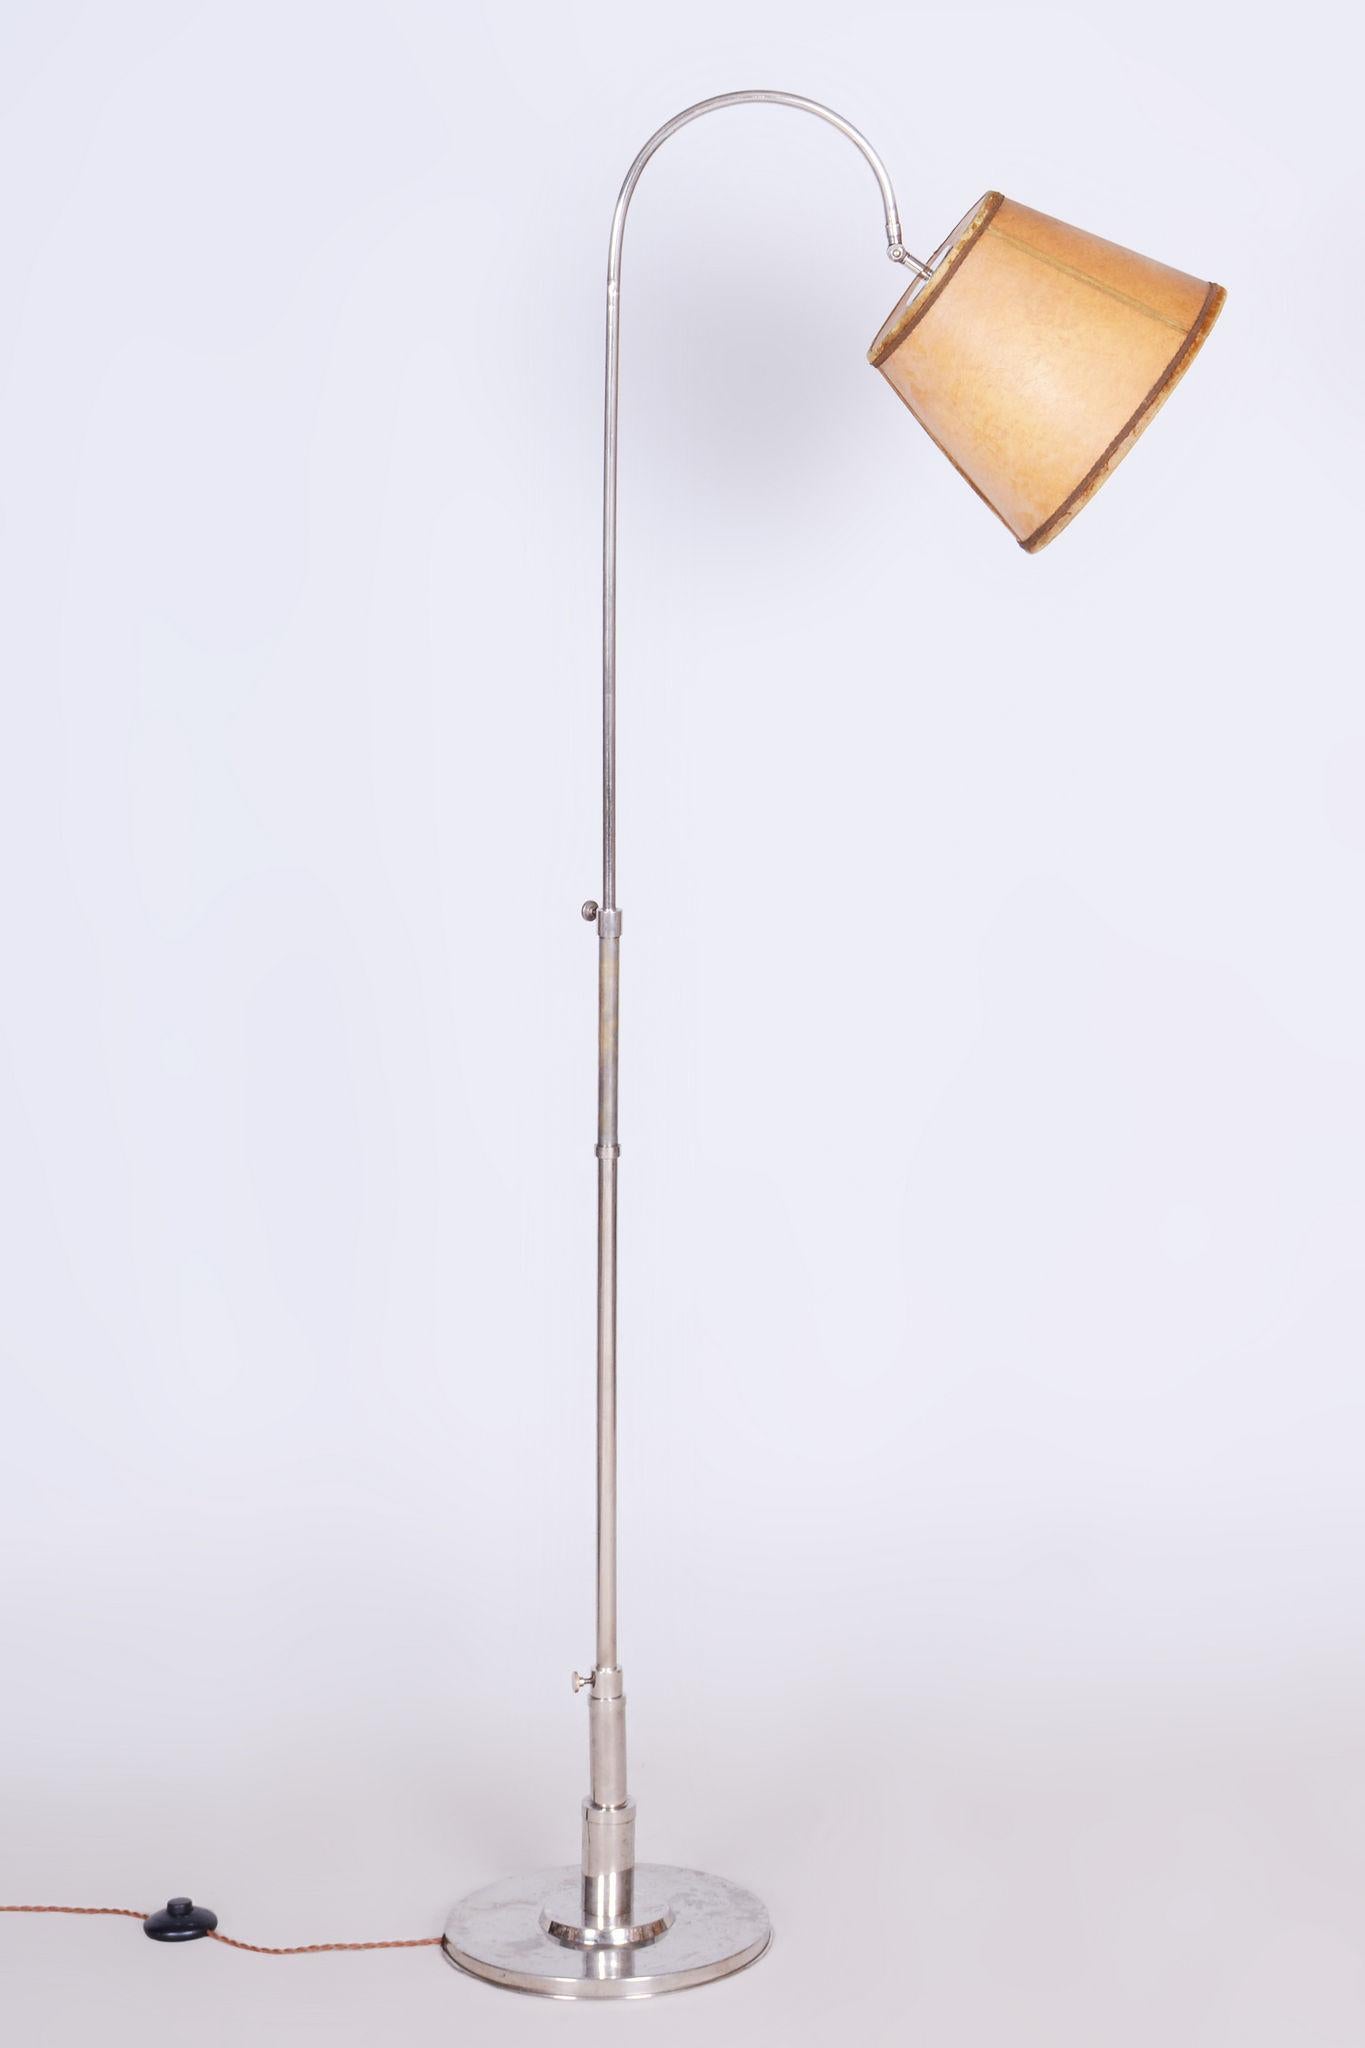 20th Century Restored Czech Bauhaus Floor Lamp, Nickel-Plated Steel, Parchment Shade, 1920s For Sale